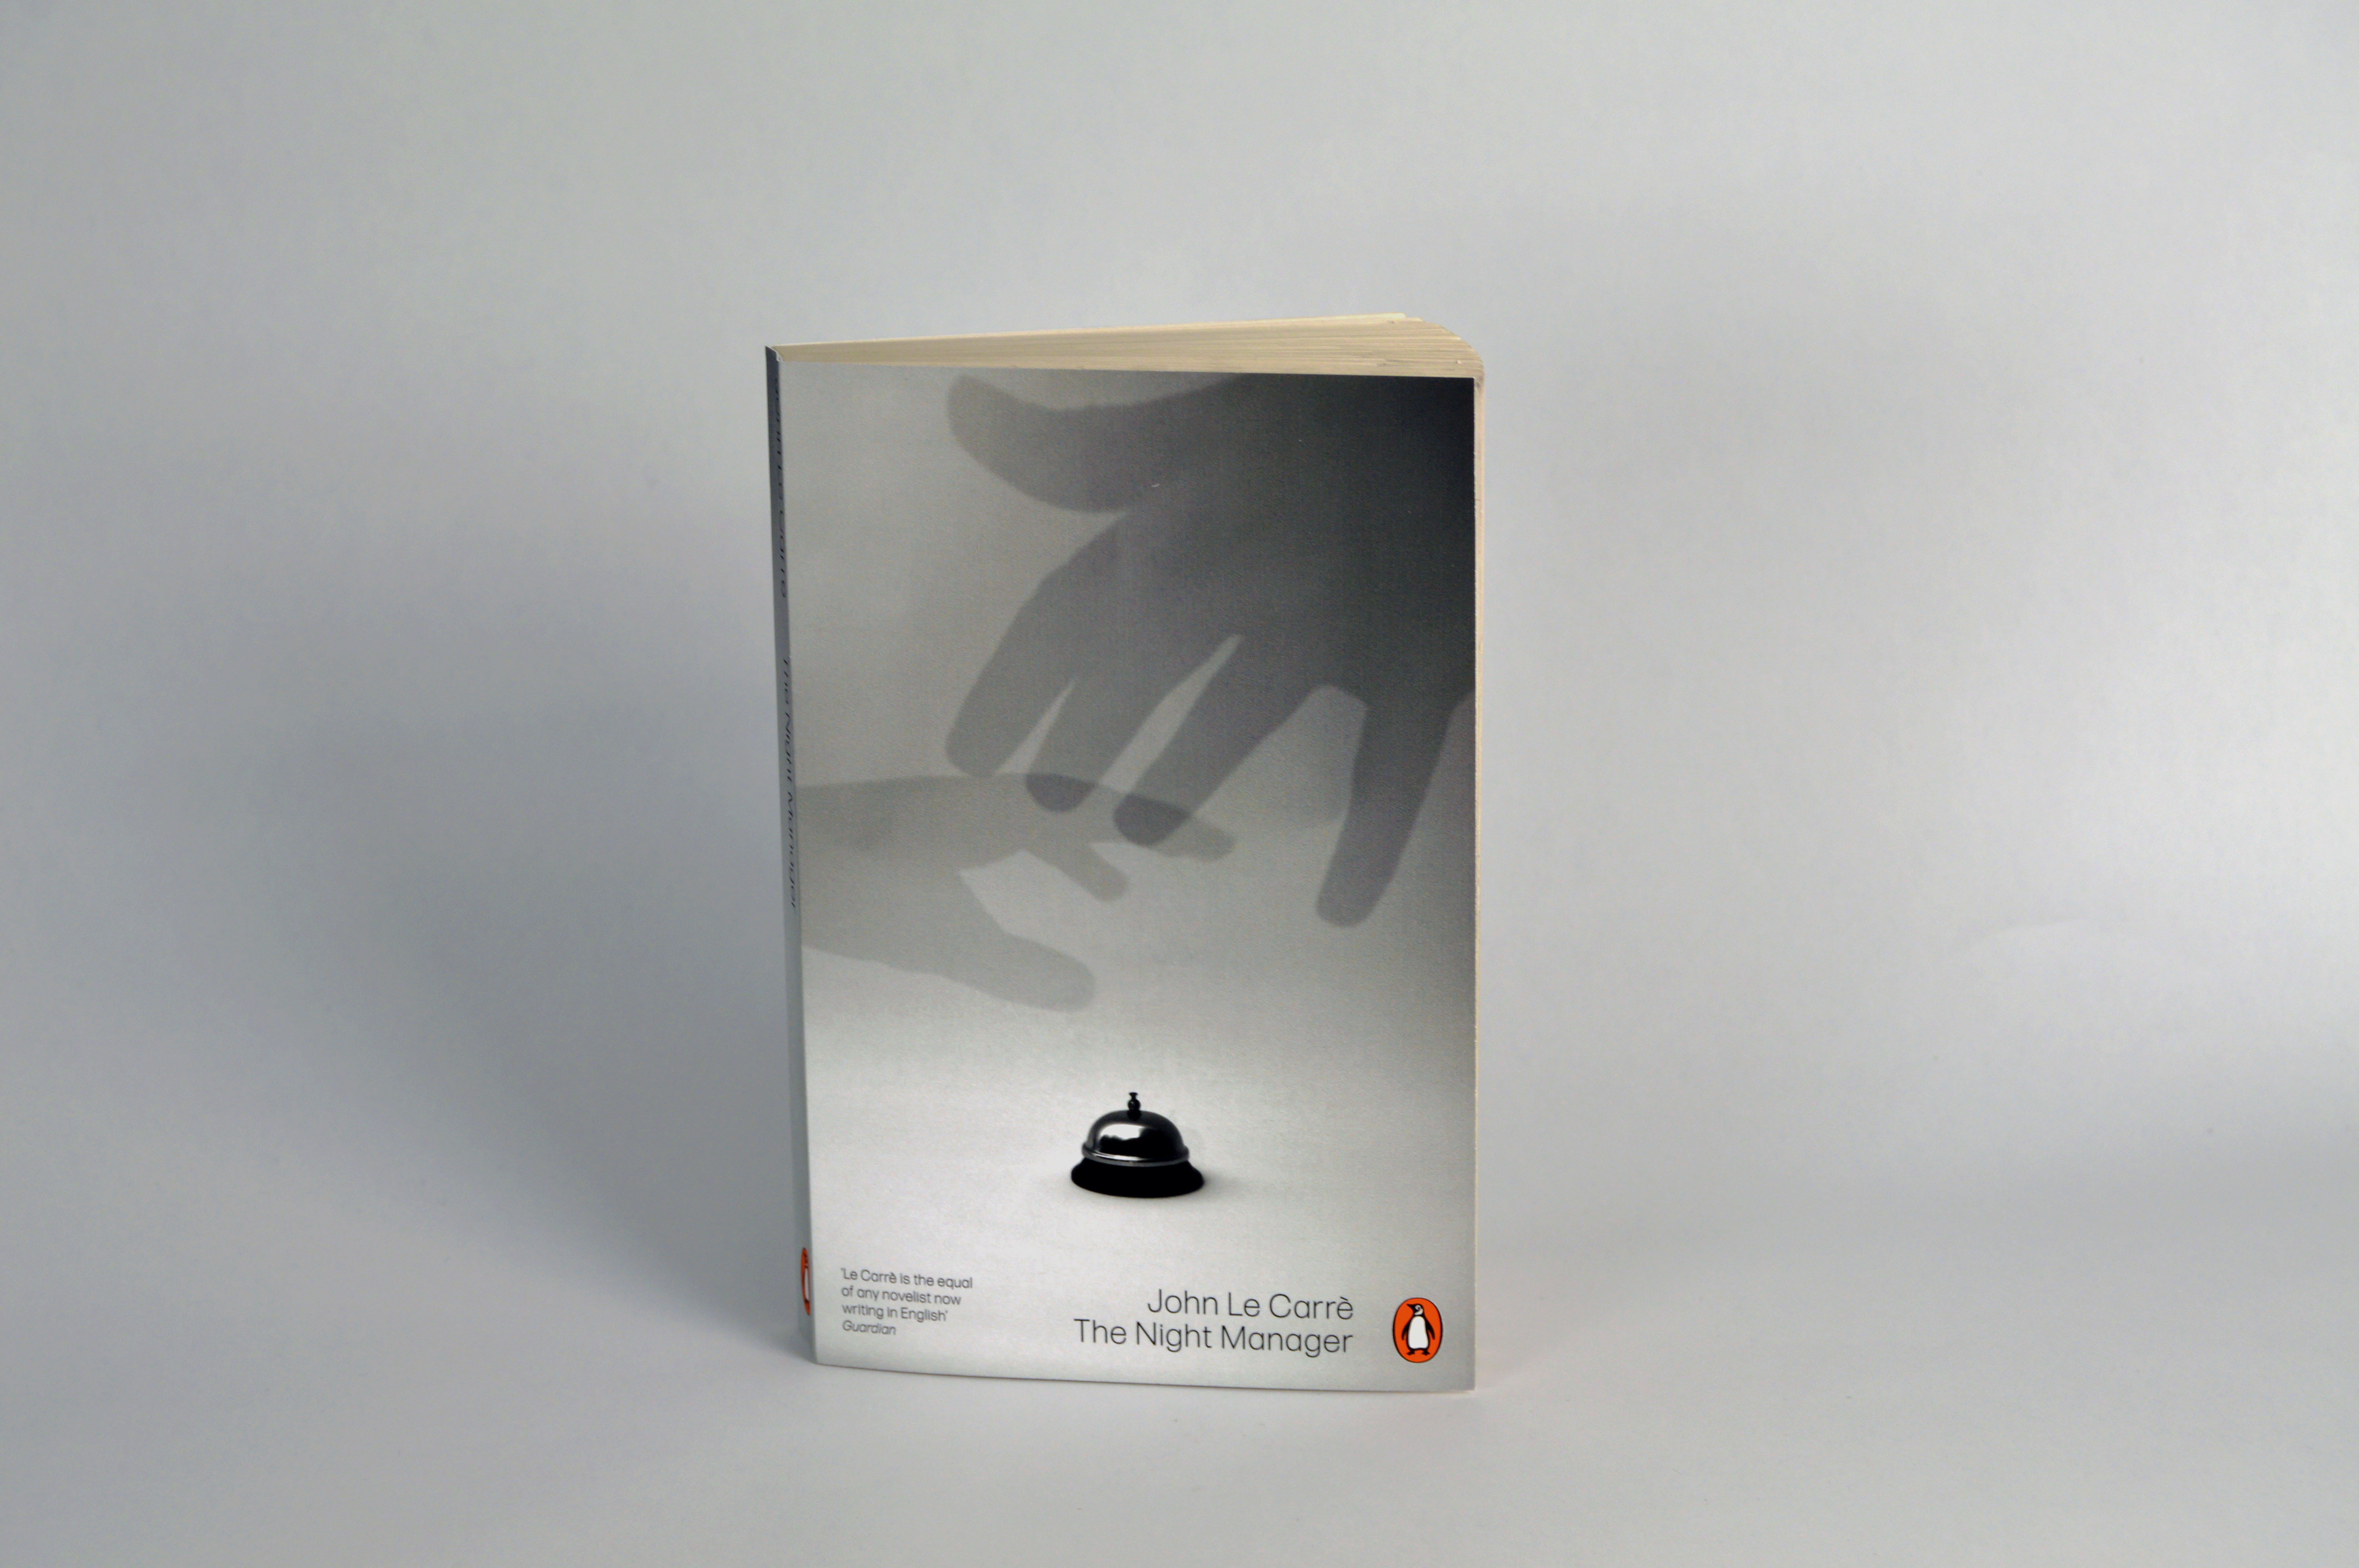 Front view of cover design depicting the artwork of 2 hands reaching for the receptionists bell.